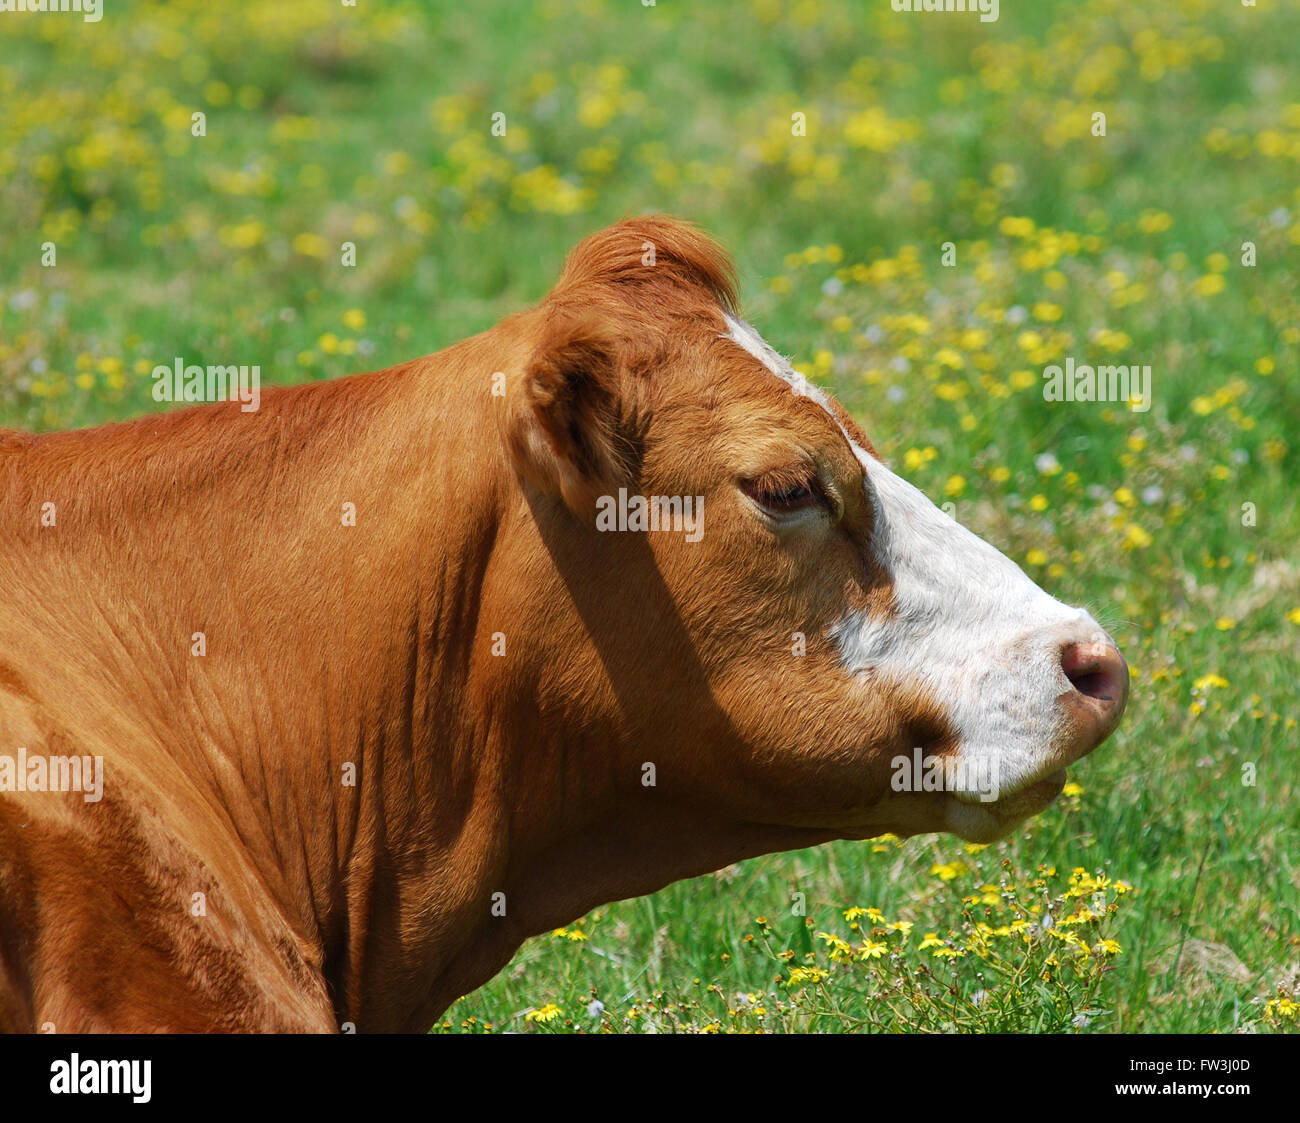 A cow in a field Stock Photo